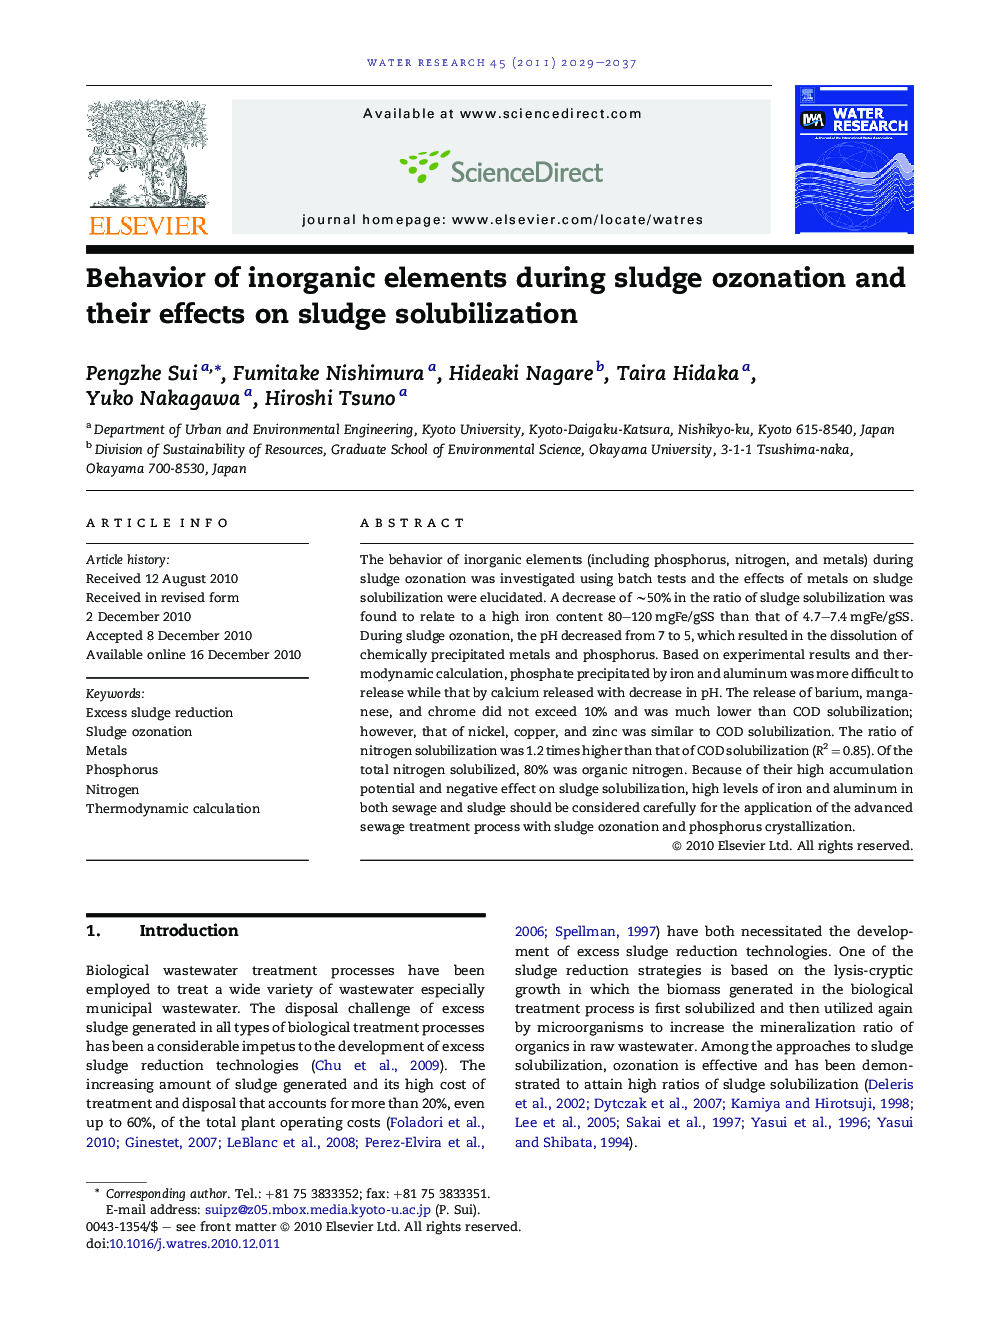 Behavior of inorganic elements during sludge ozonation and their effects on sludge solubilization